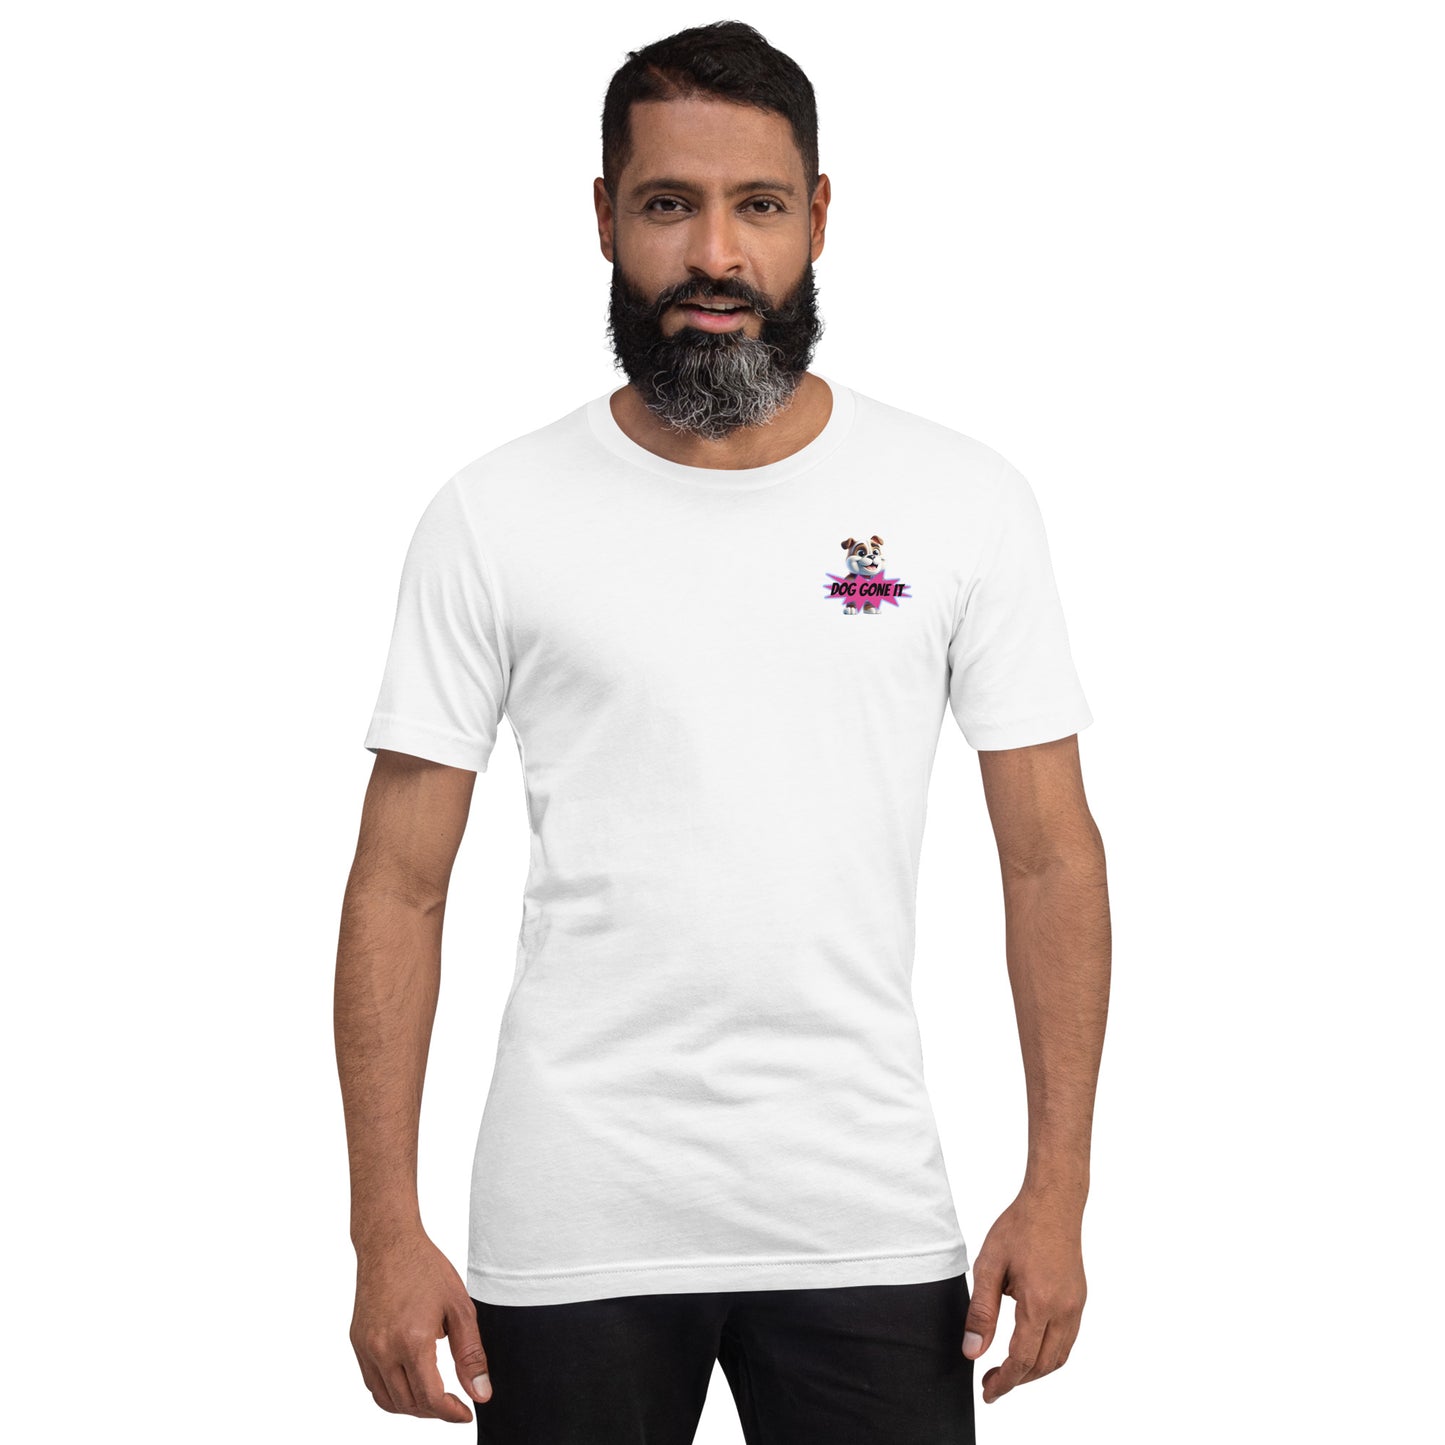 The only one: Unisex T-shirt